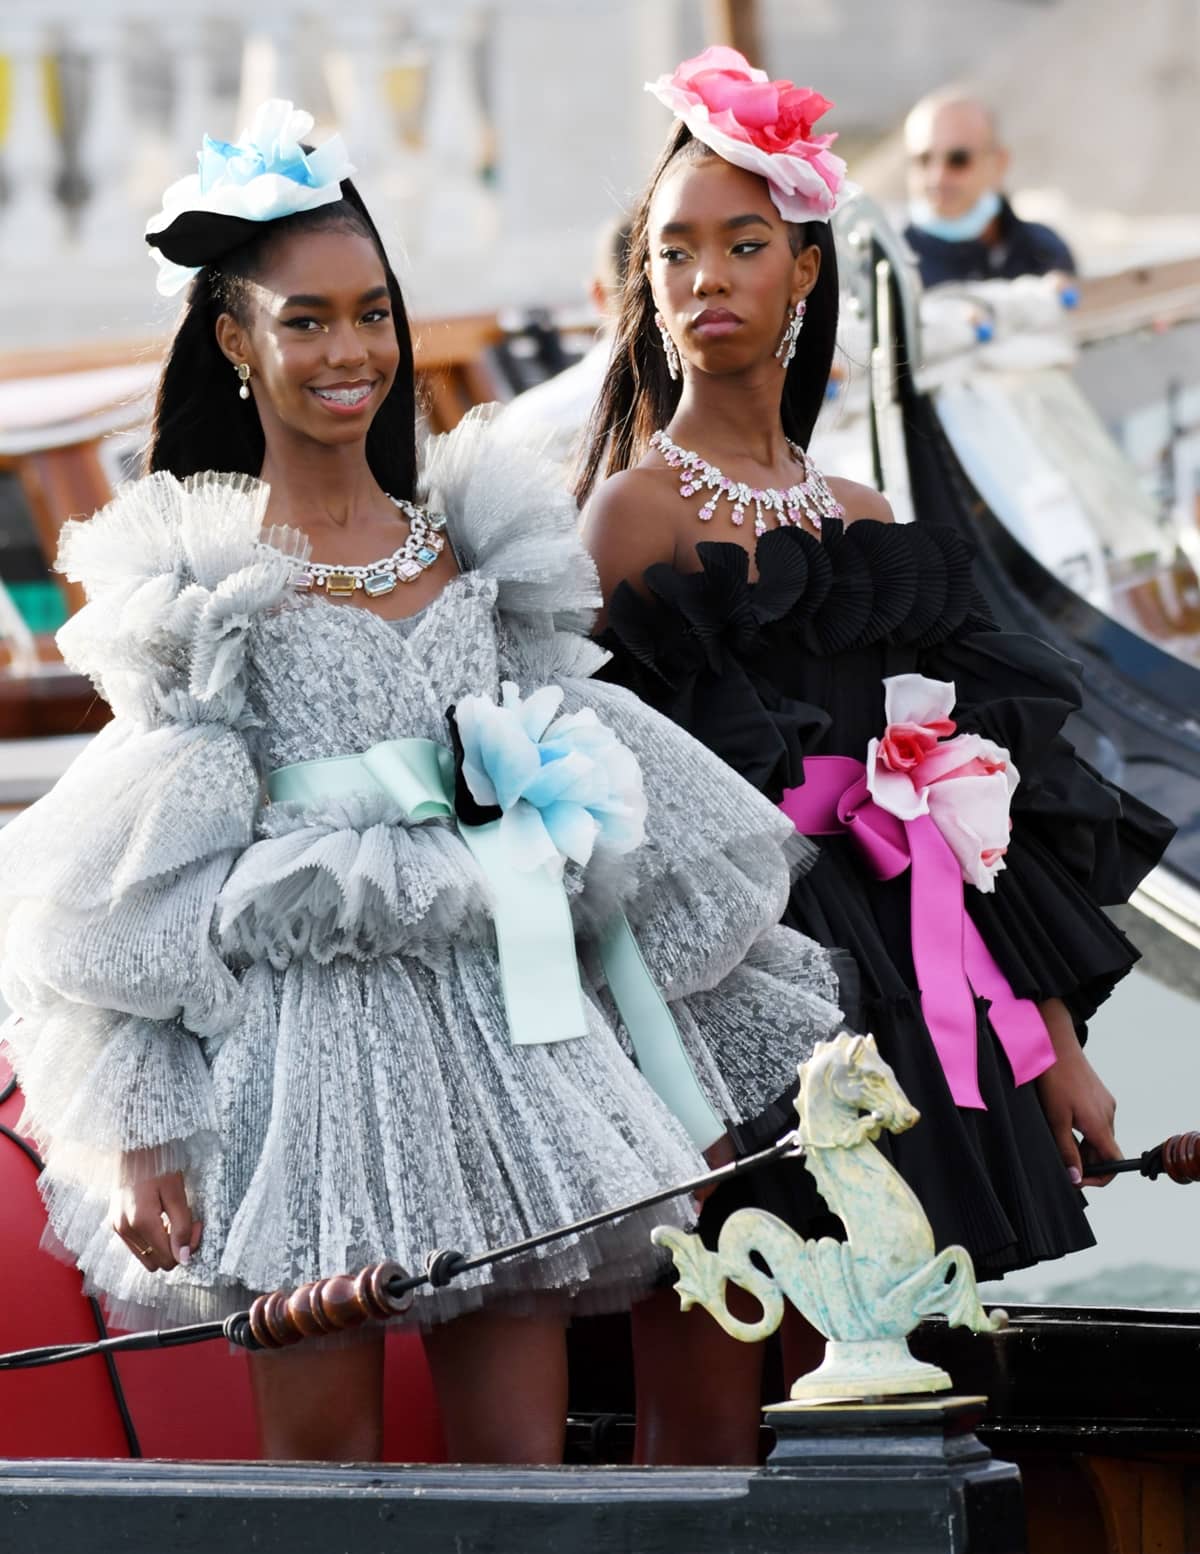 Sean "Diddy" Combs's twin daughters D'Lila Star and Jessie James